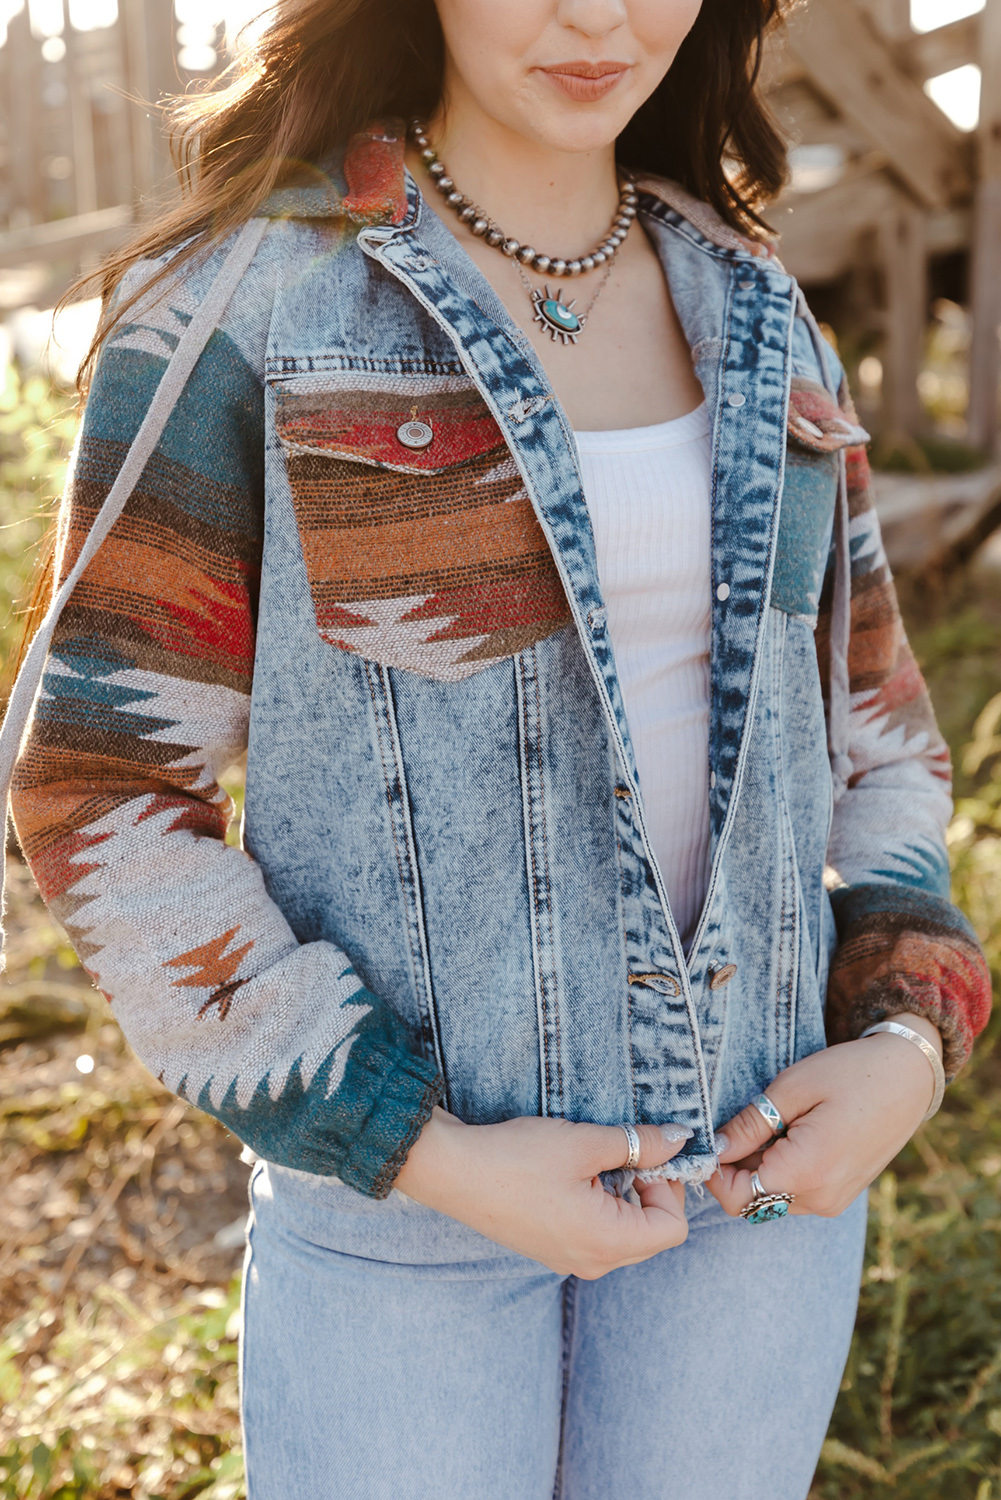 Women’s denim jackets are a classical piece of clothing ideal for any occasion